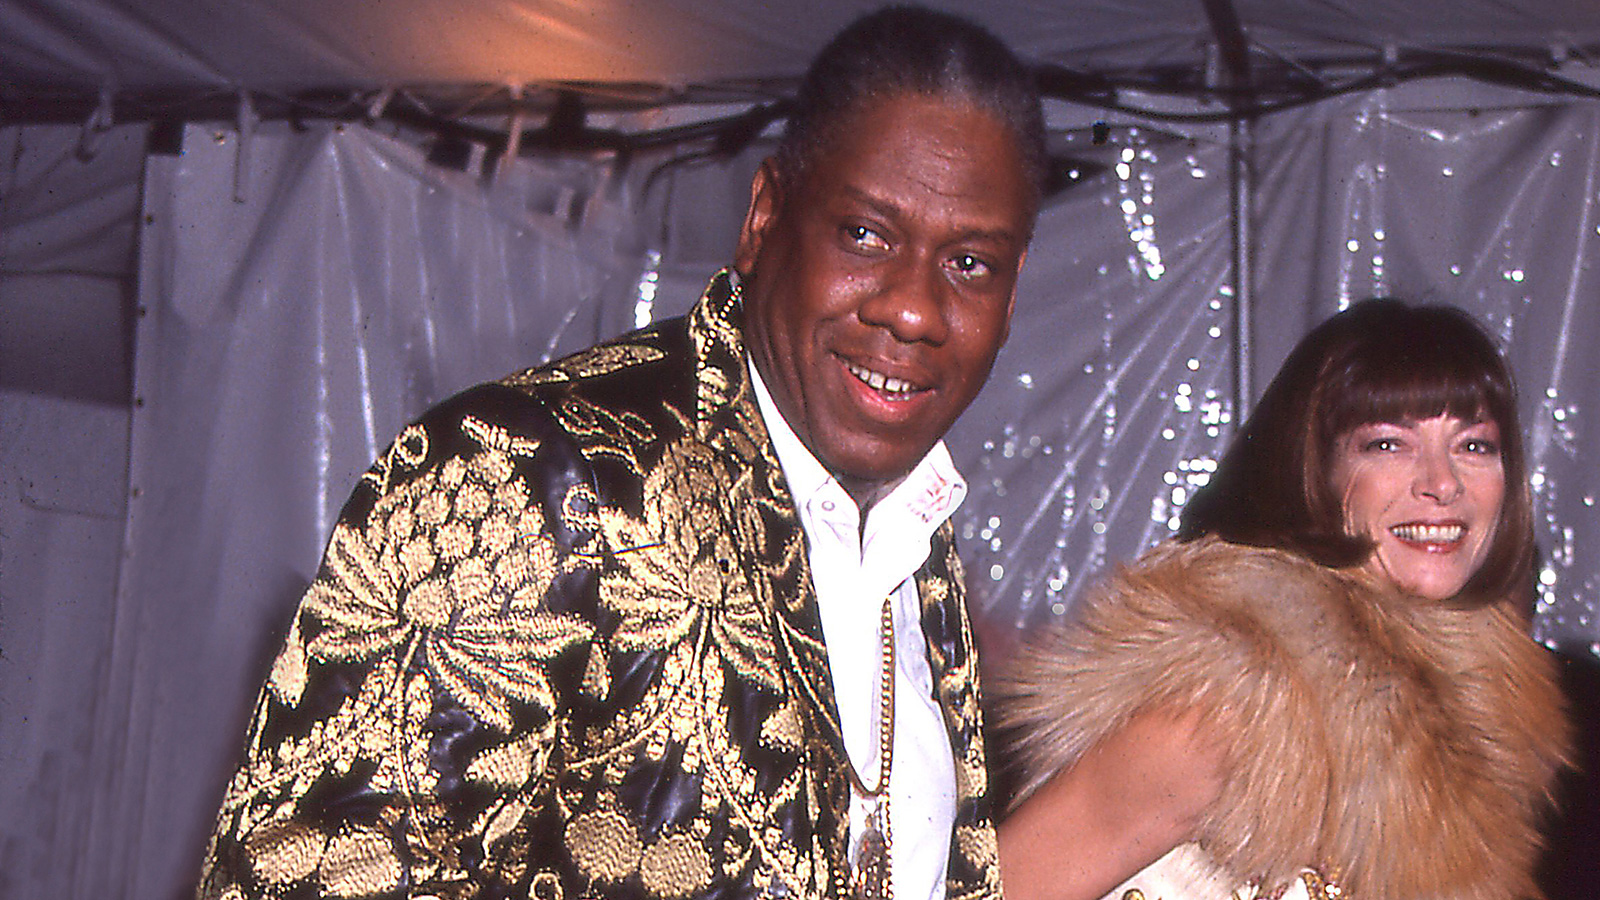 Vogue's former editor at large Andre Leon Talley and Anna Wintour attend the Met Gala on December 6, 1999.